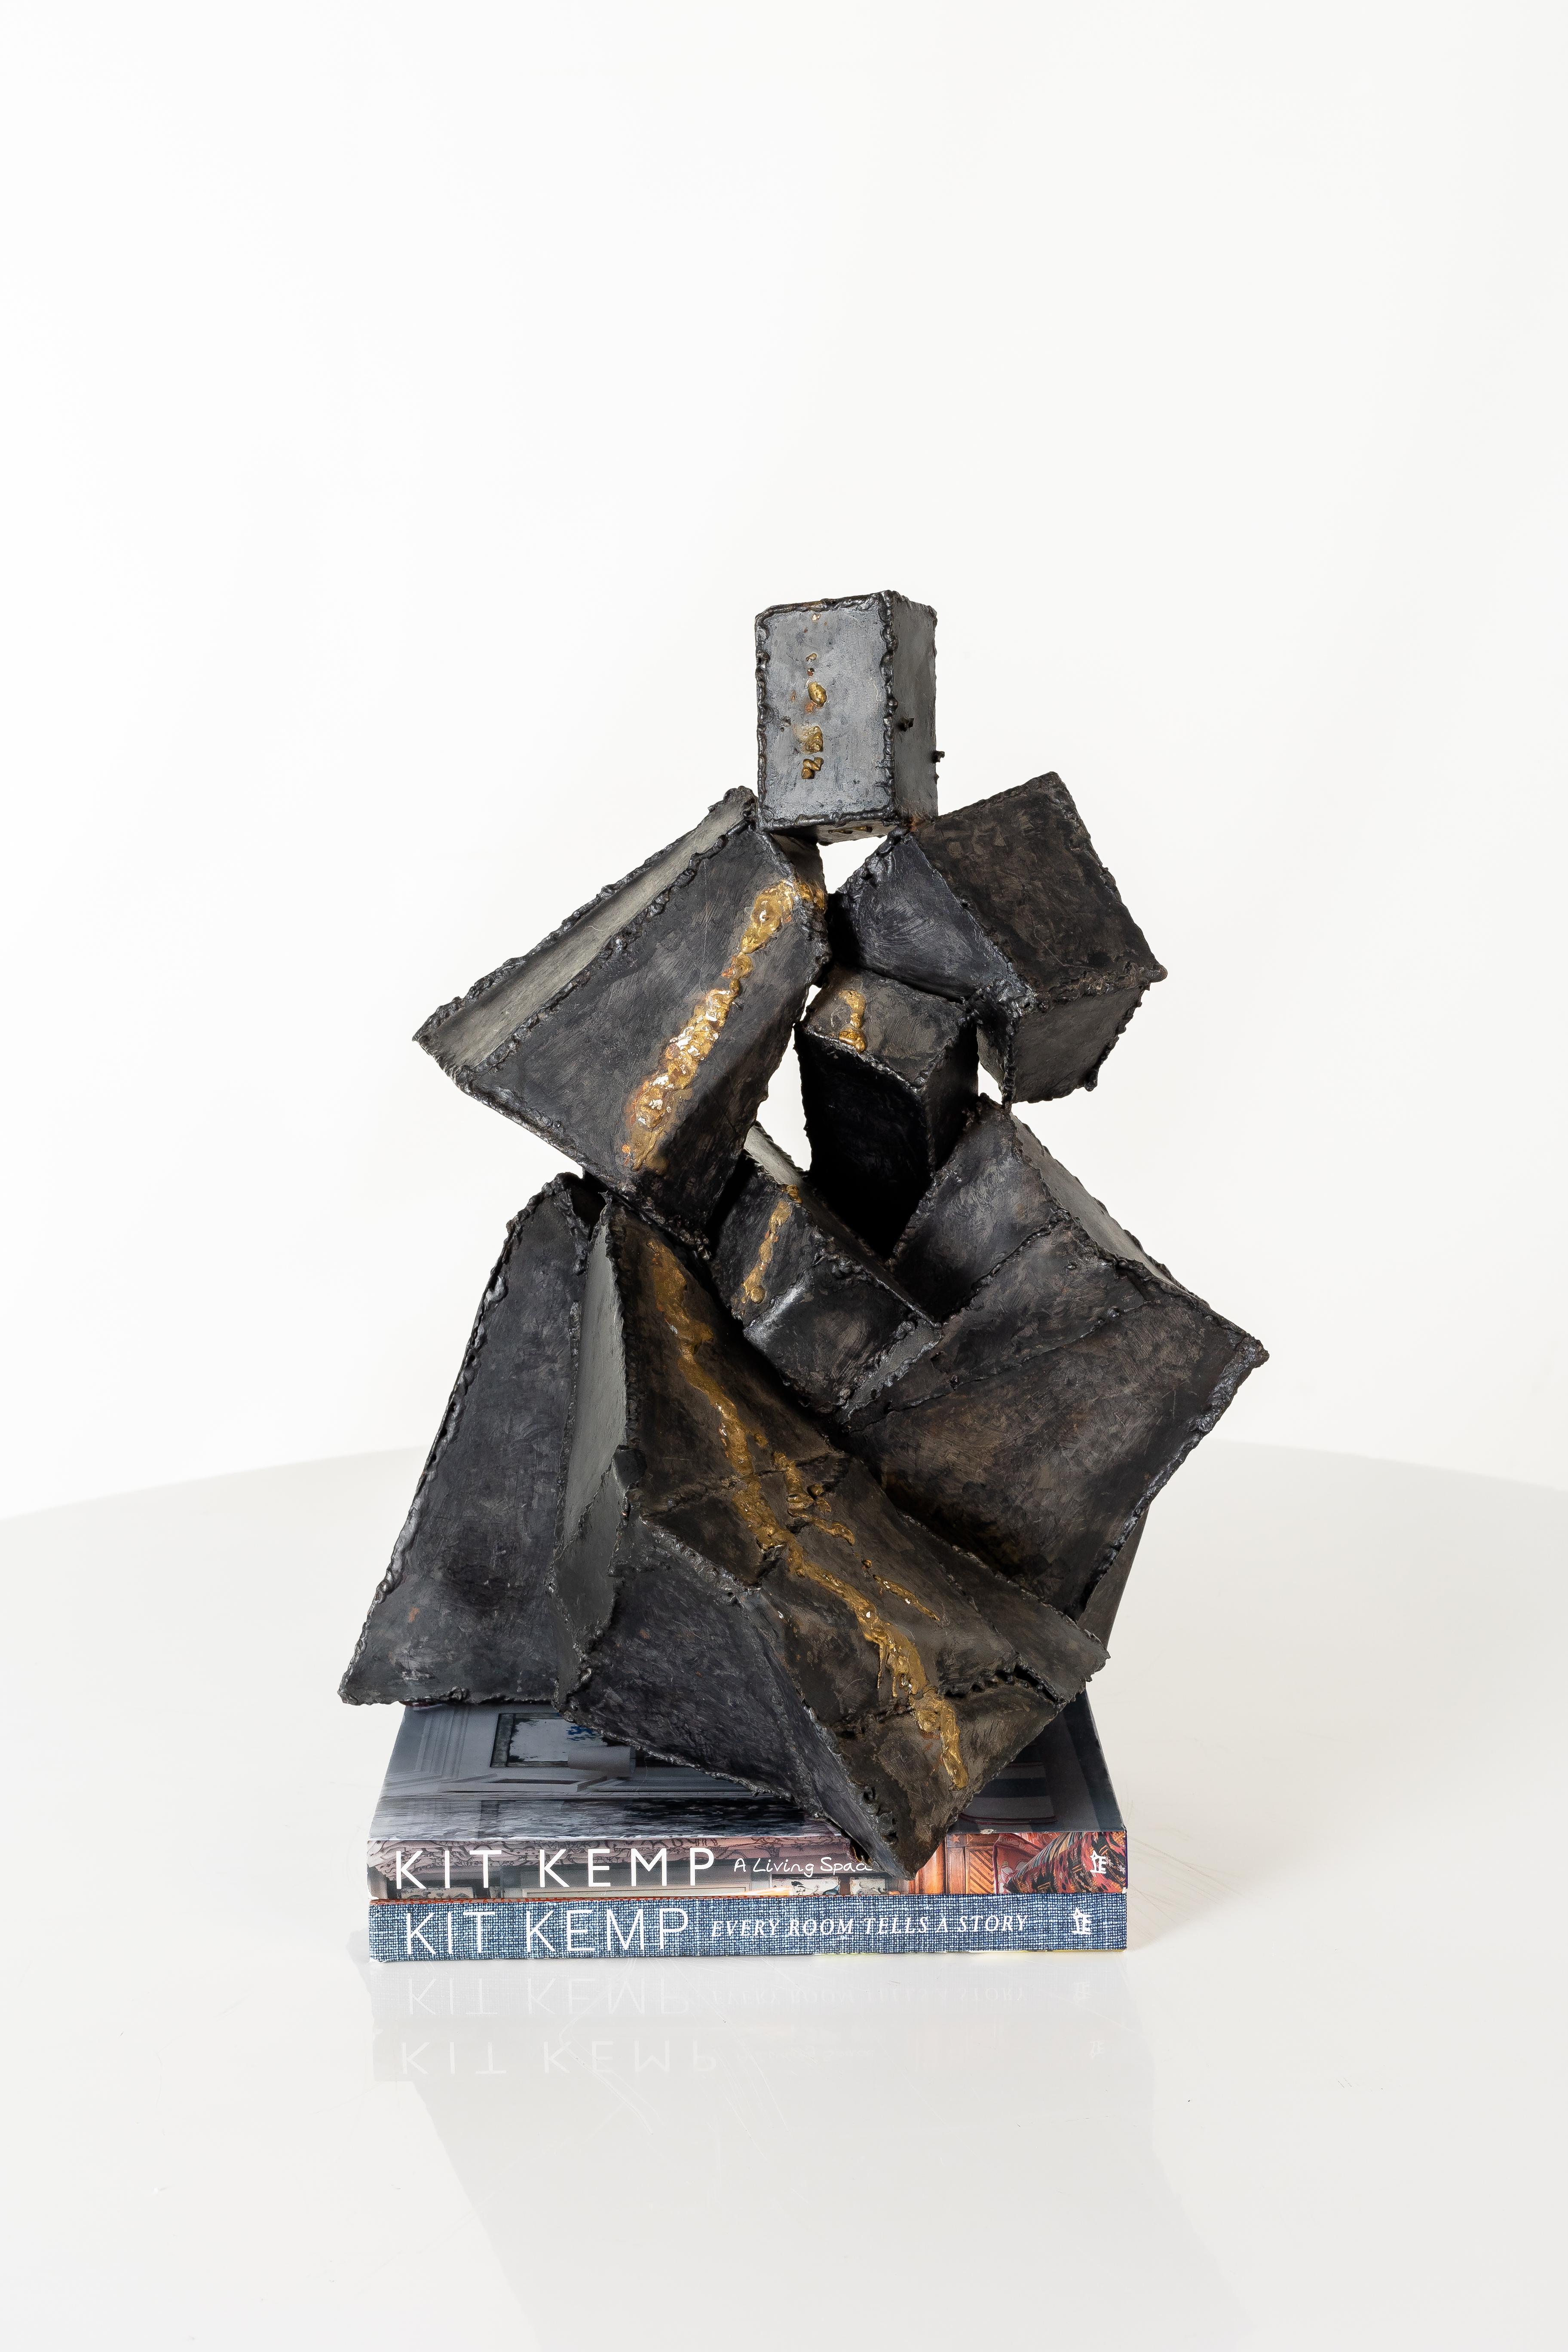 Brutalist abstract sculpture by Thea Wisser

Curated Decor by Brendan Bass.